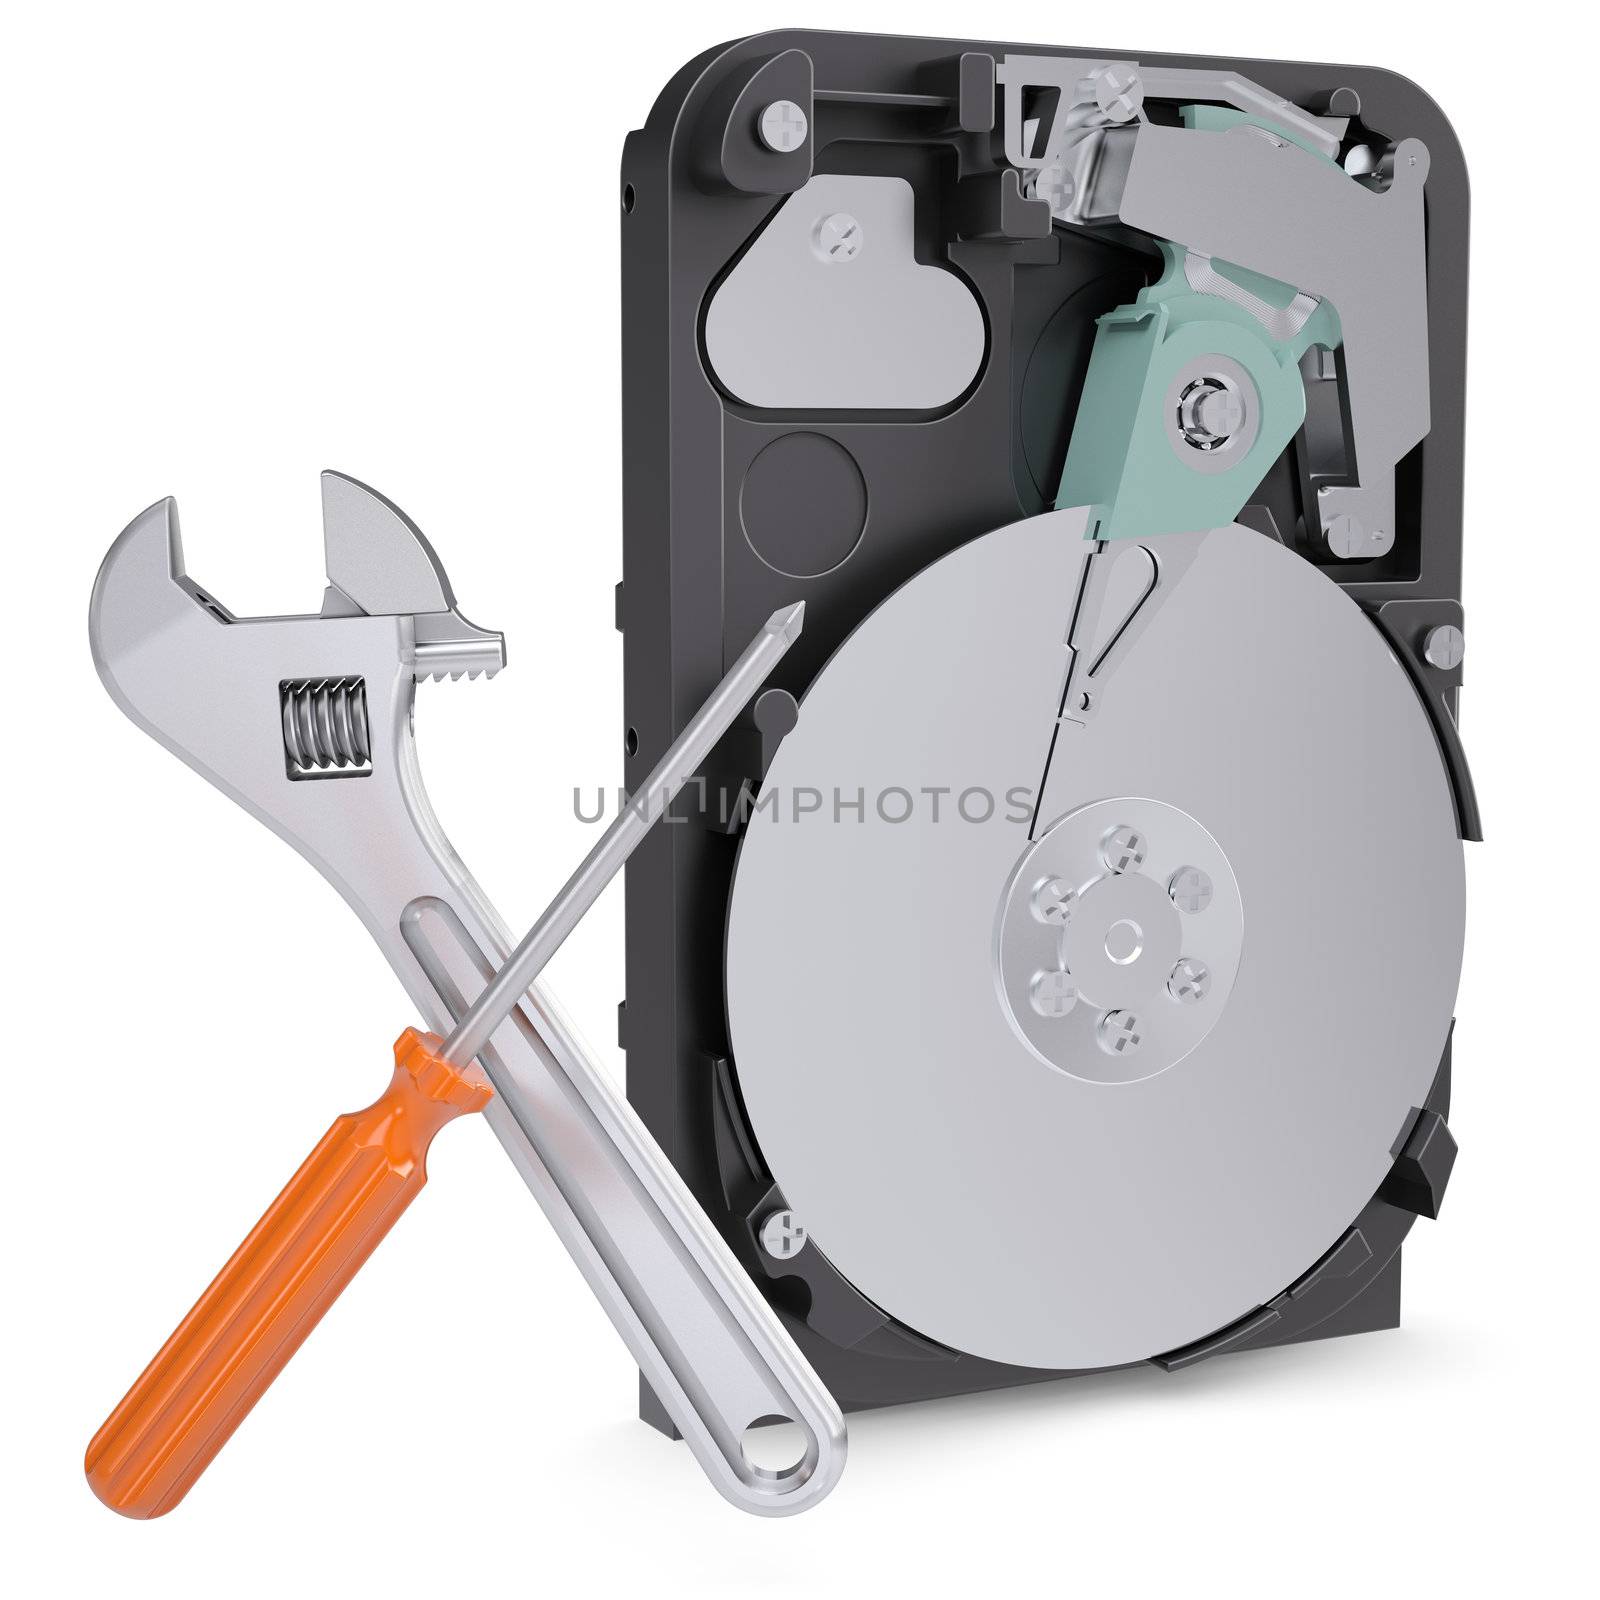 Screwdriver, wrench and disclosed hard drive by cherezoff